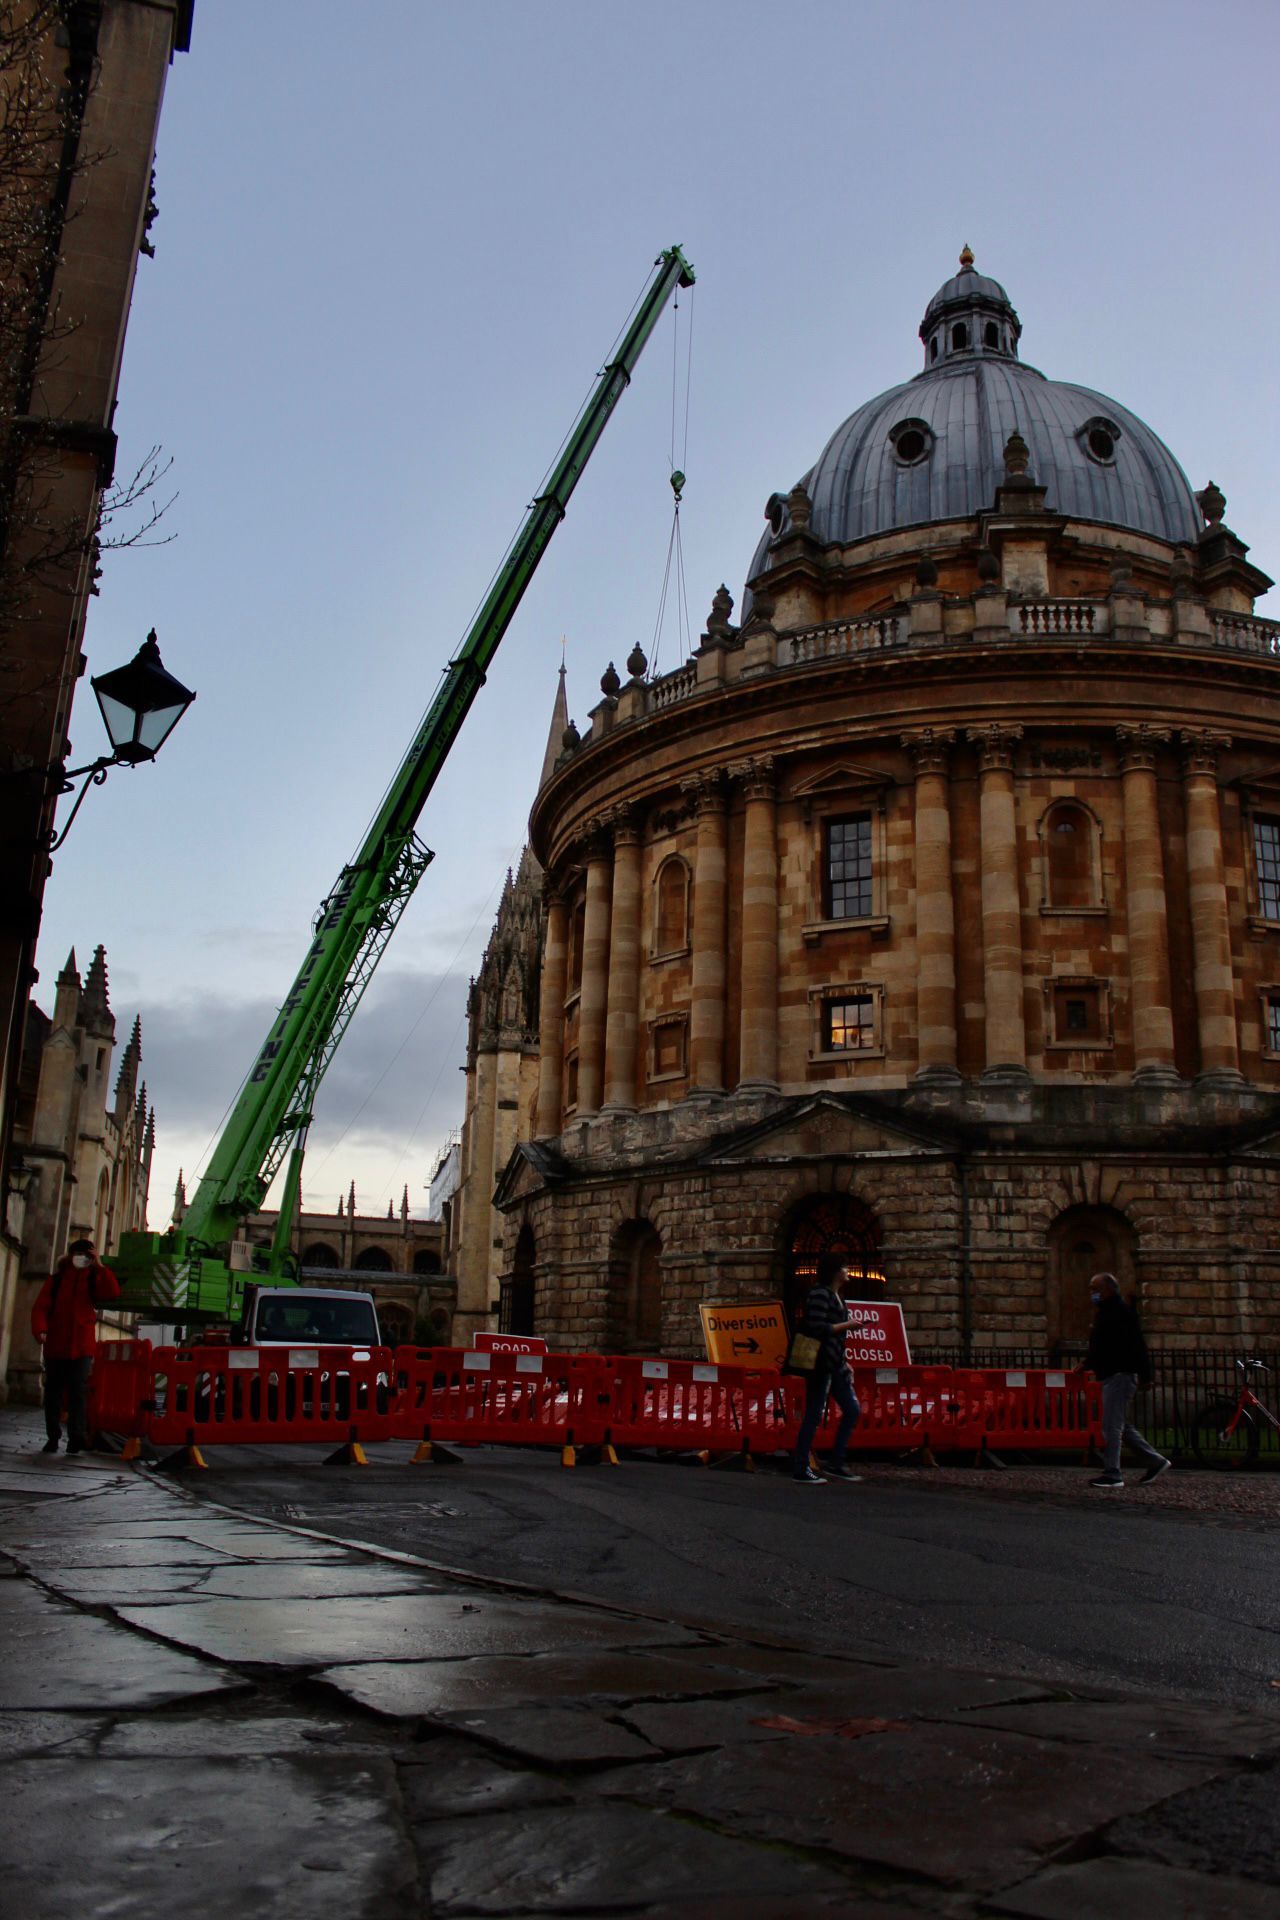 Workmen begin setting up for filming what is understood to be the new Willy Wonka film in Oxfords Radcliffe Square